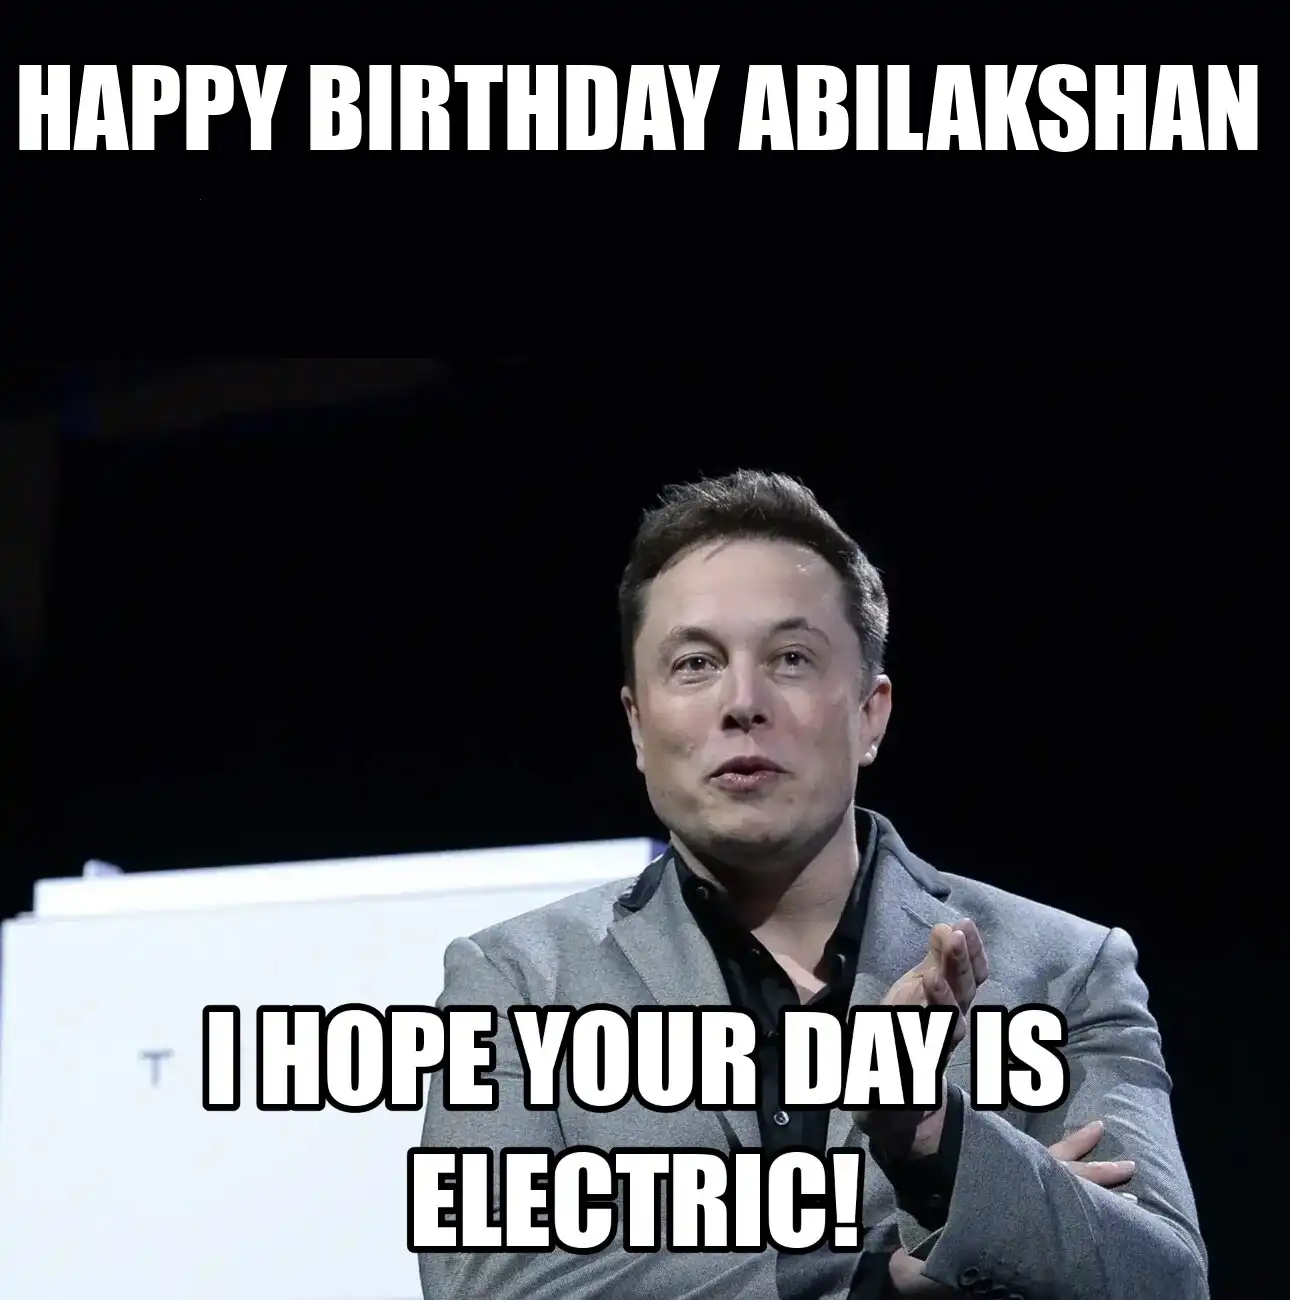 Happy Birthday Abilakshan I Hope Your Day Is Electric Meme